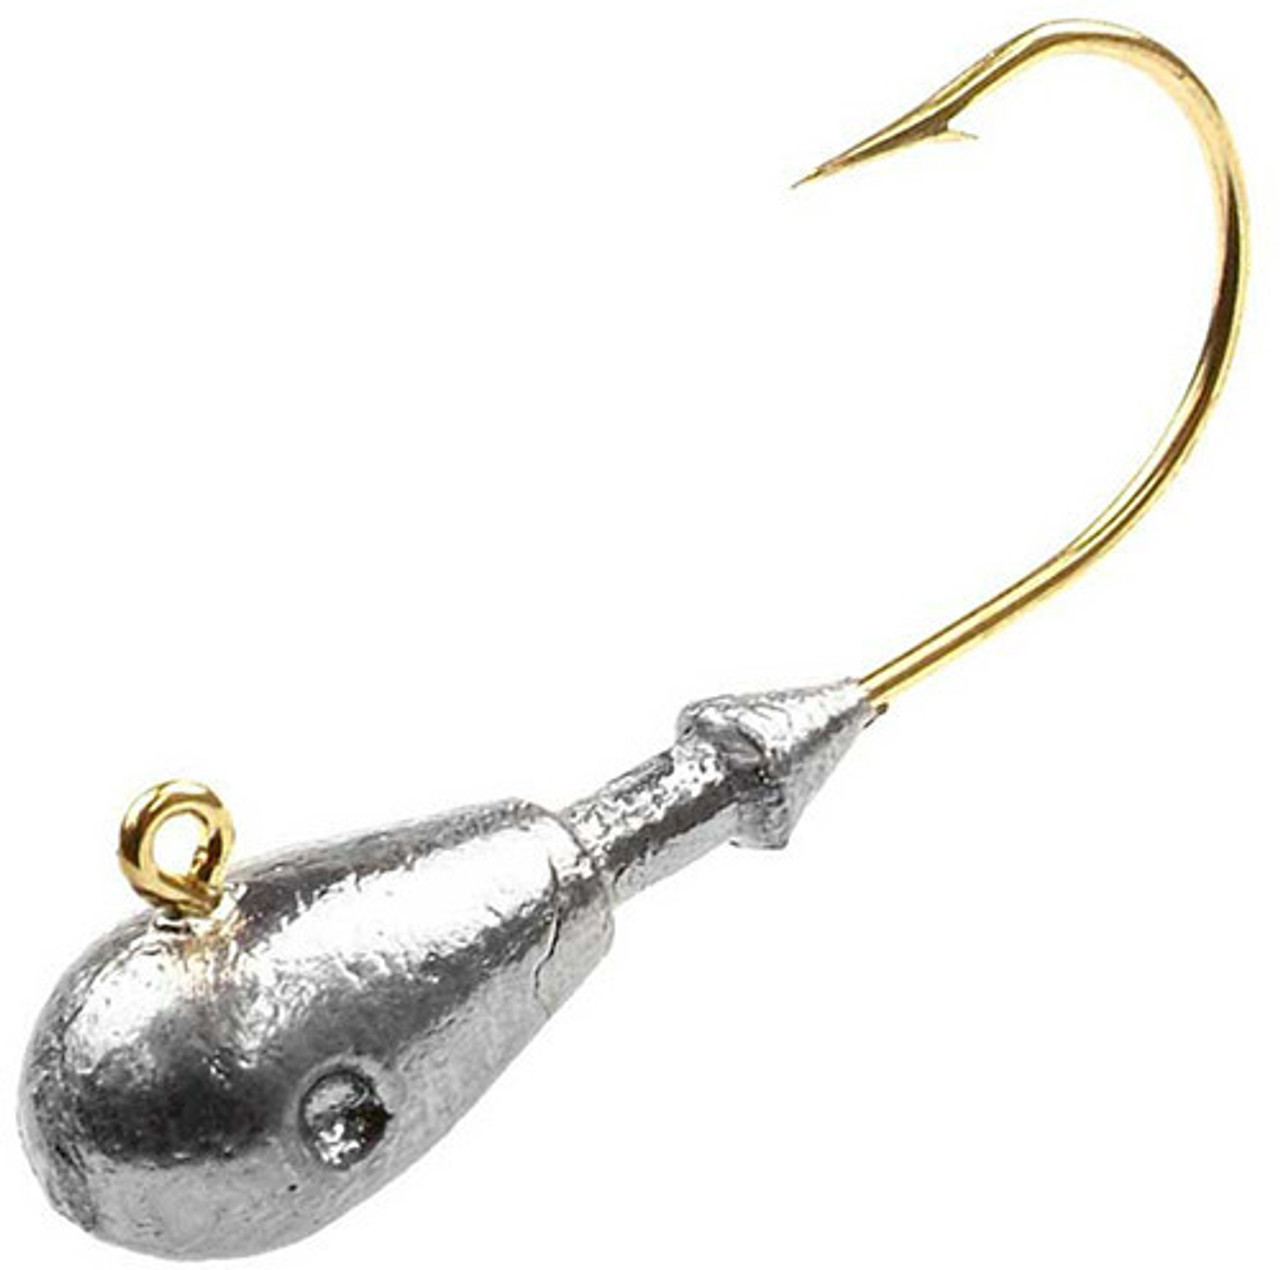 Eagle Claw Jig Hooks Style 570 Sizes 10 - 4/0 - Barlow's Tackle